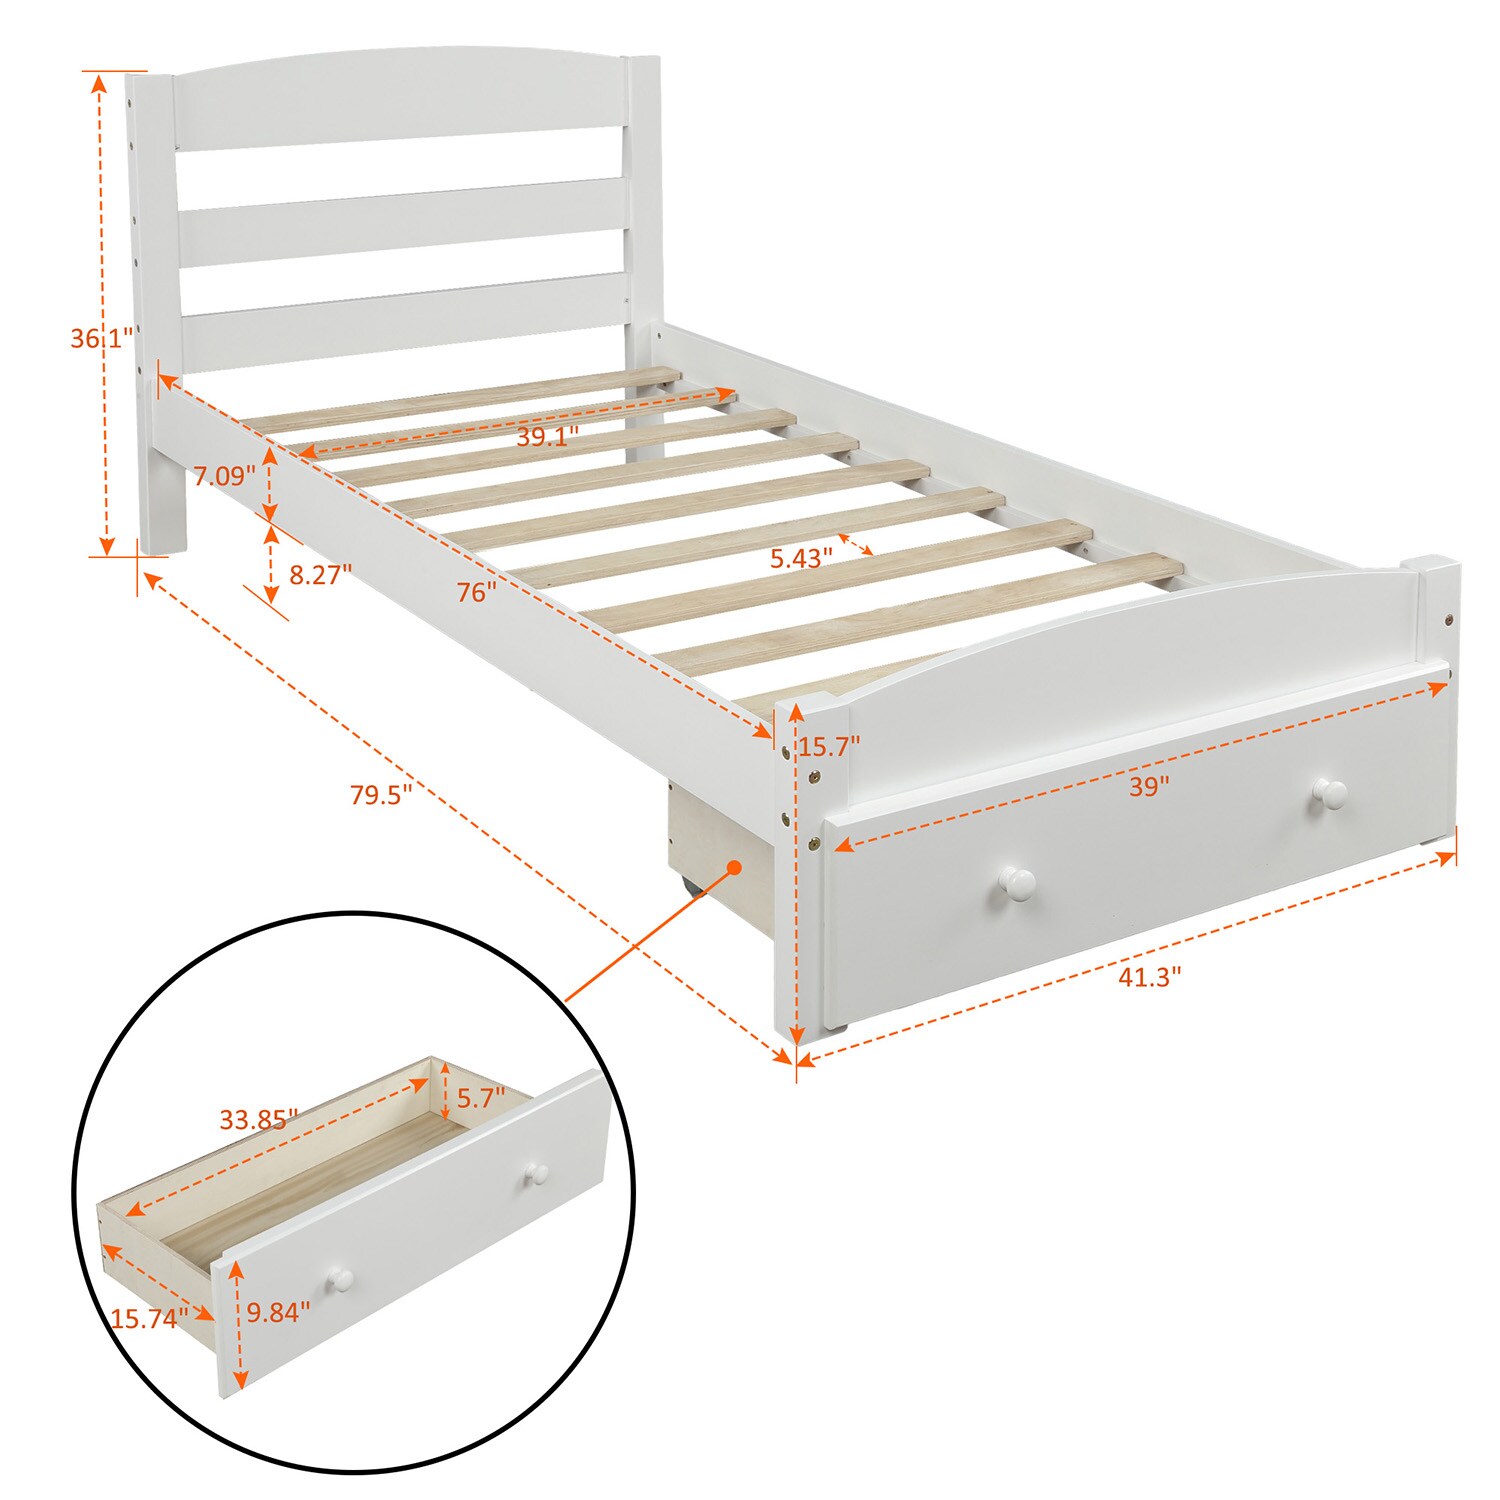 GZMR Platform Twin Bed Frame with Storage Drawer White Twin Wood Bed ...